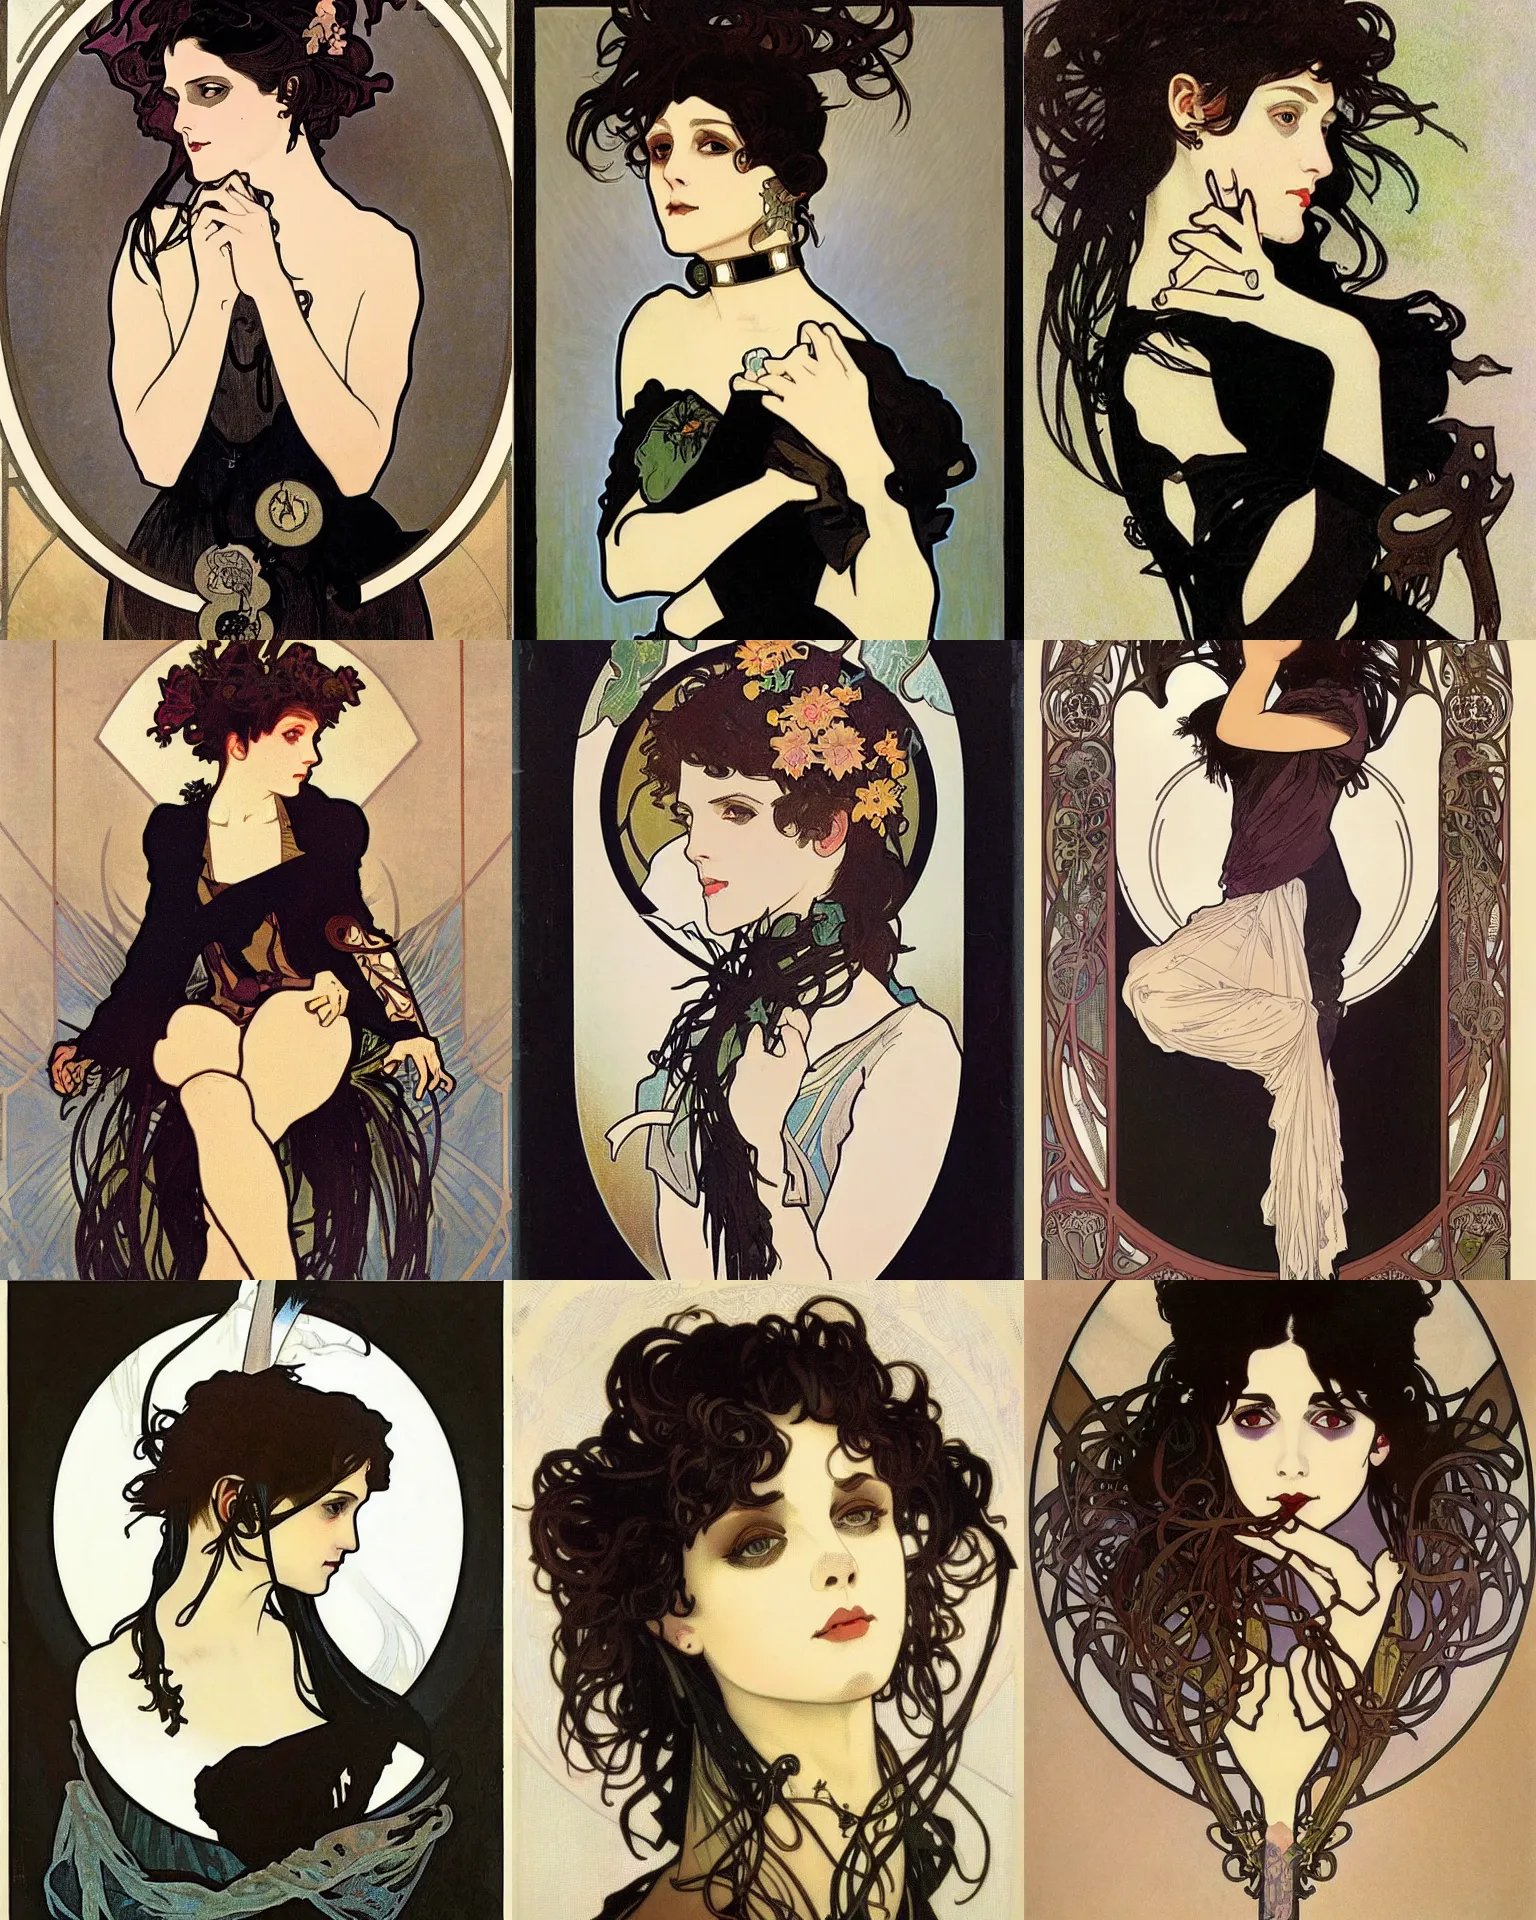 Prompt: A goth portrait by Alphonse Mucha. Her hair is dark brown and cut into a short, messy pixie cut. She has a slightly rounded face, with a pointed chin, large entirely-black eyes, and a small nose. She is wearing a black tank top, a black leather jacket, a black knee-length skirt, a black choker, and black leather boots.